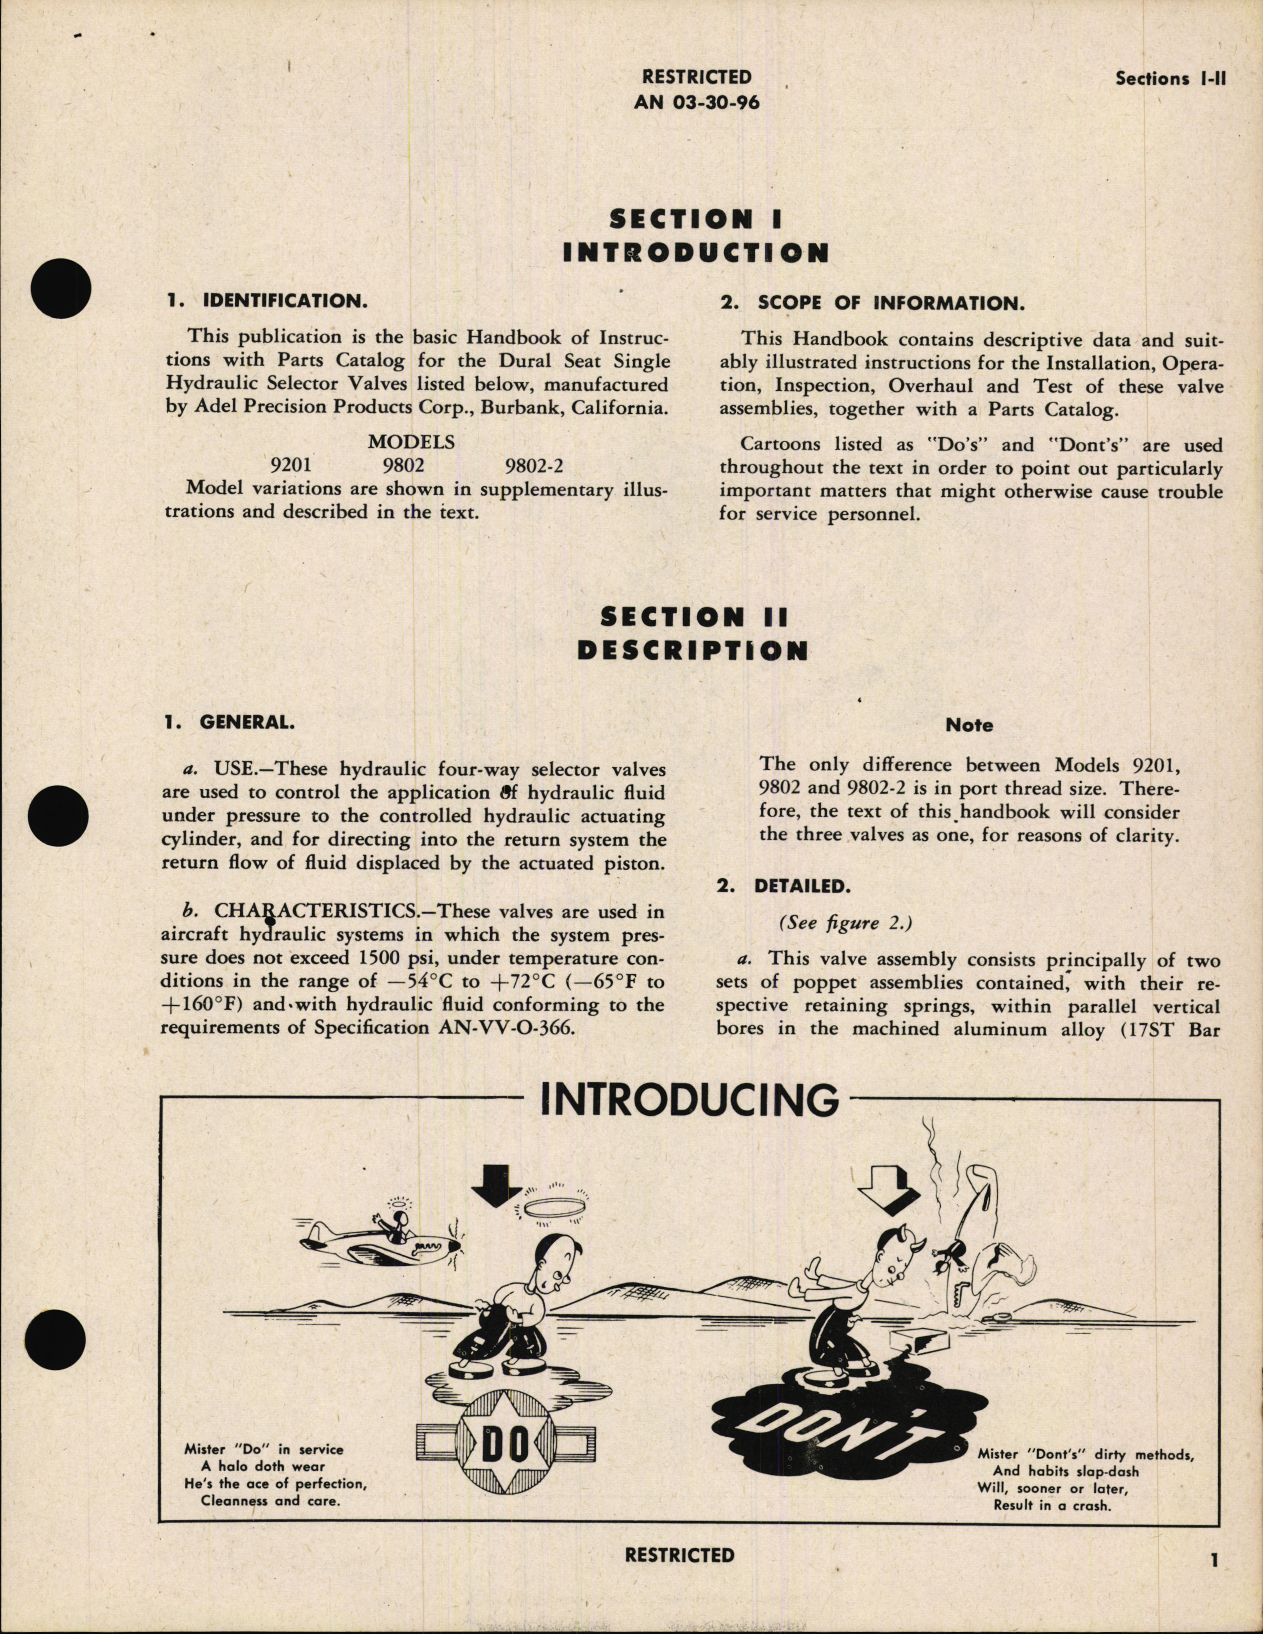 Sample page 5 from AirCorps Library document: Handbook of Instructions with Parts Catalog for Dural Seat Single Hydraulic Selector Valves